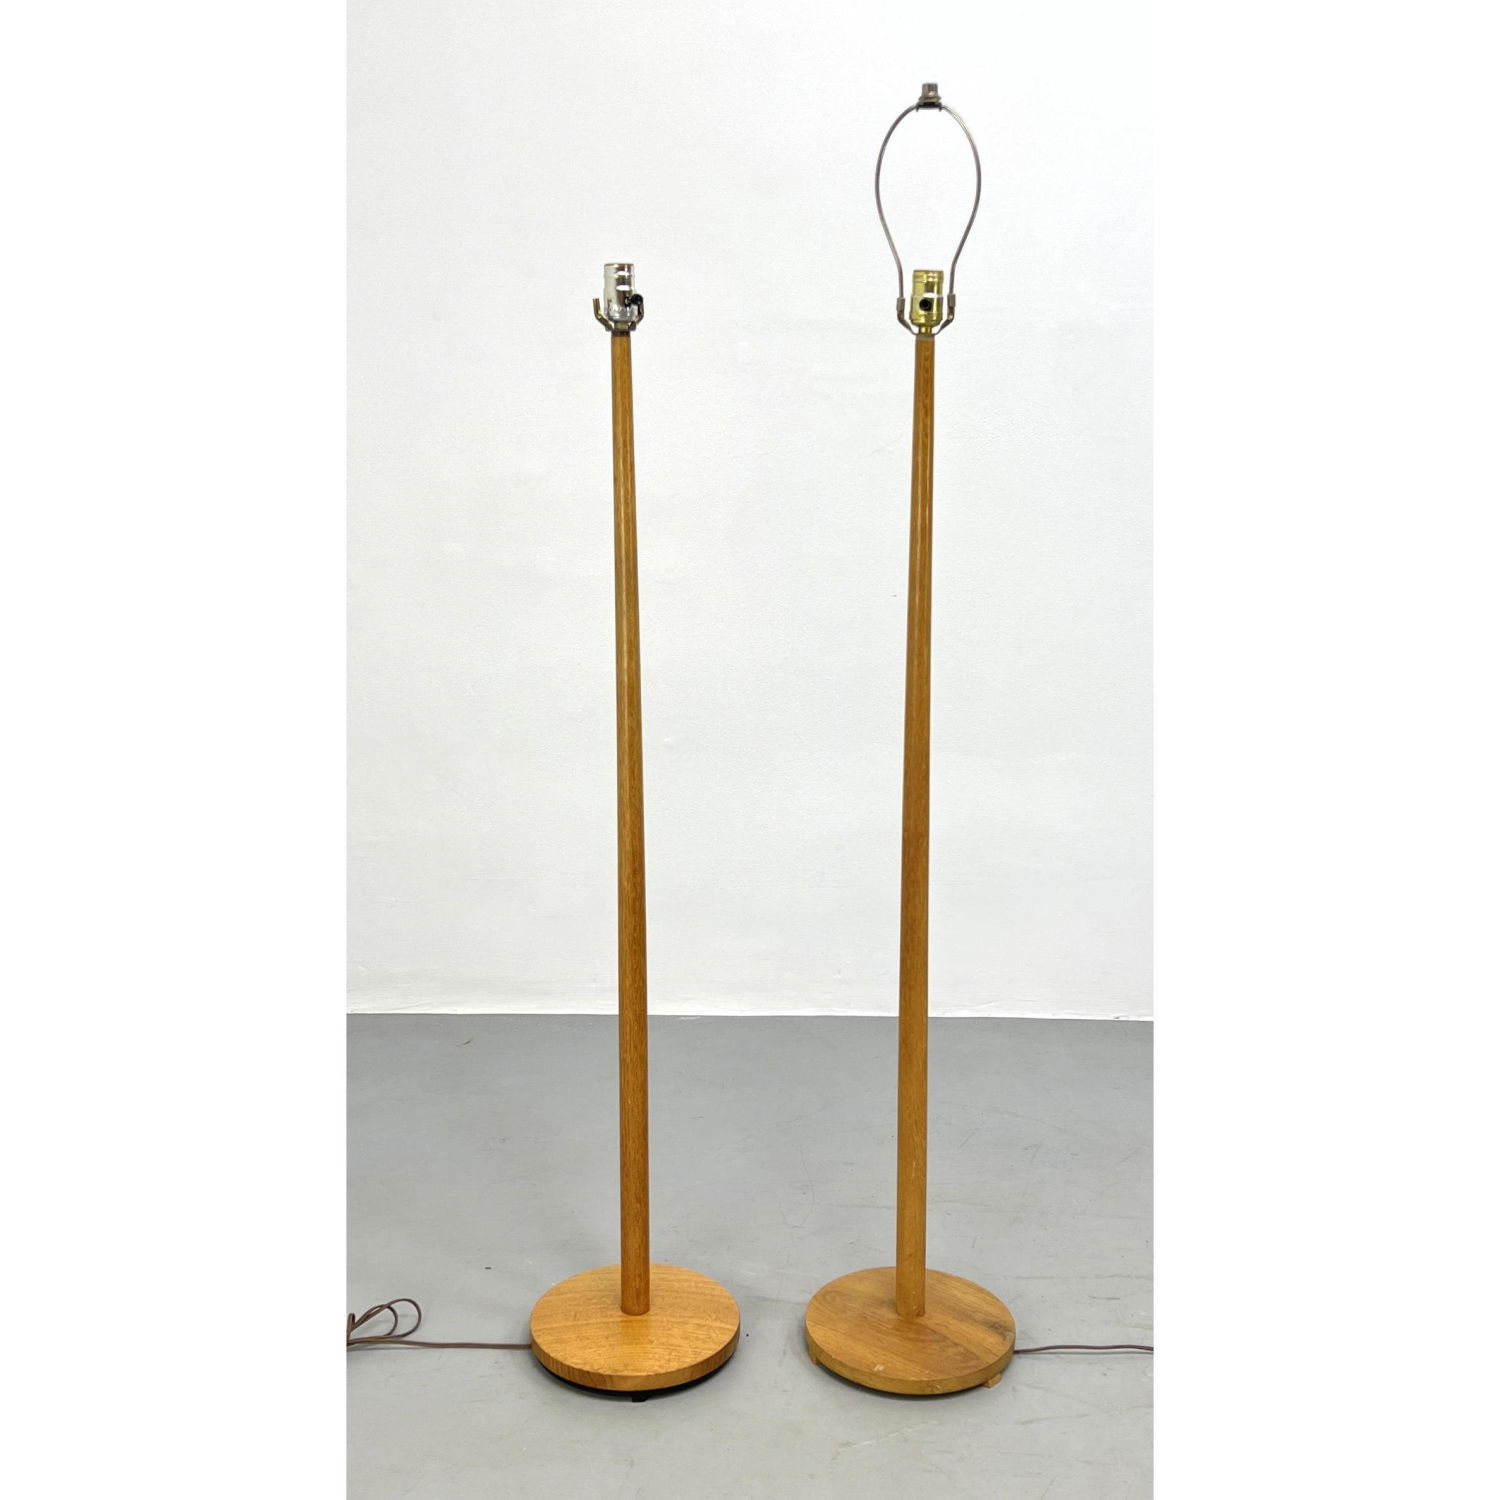 Pair teak lamps, marked "Made in